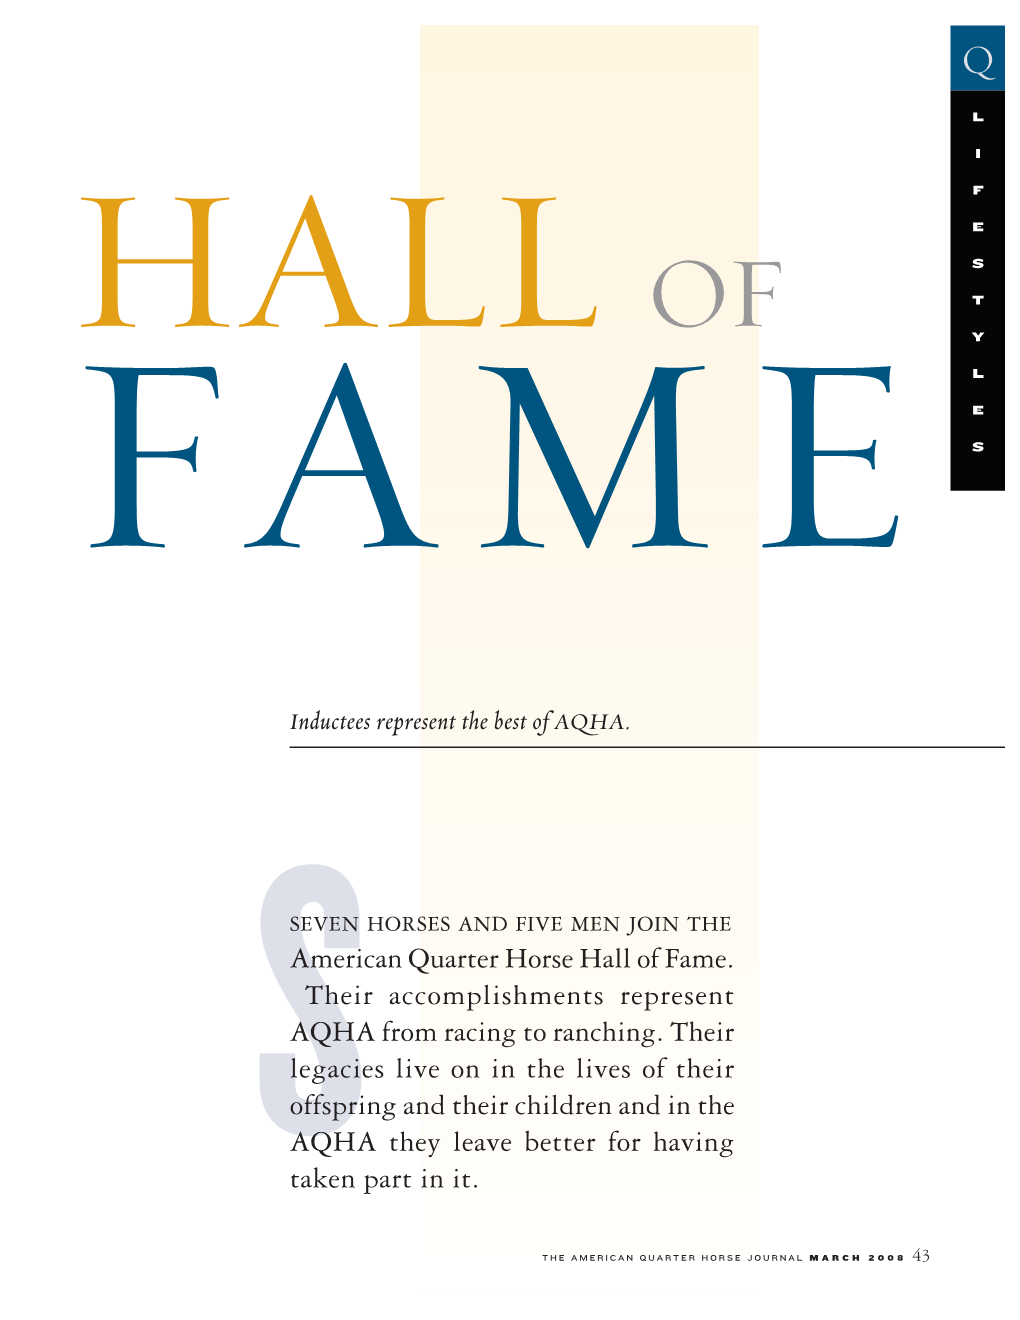 American Quarter Horse Hall of Fame. Their Accomplishments Represent AQHA from Racing to Ranching